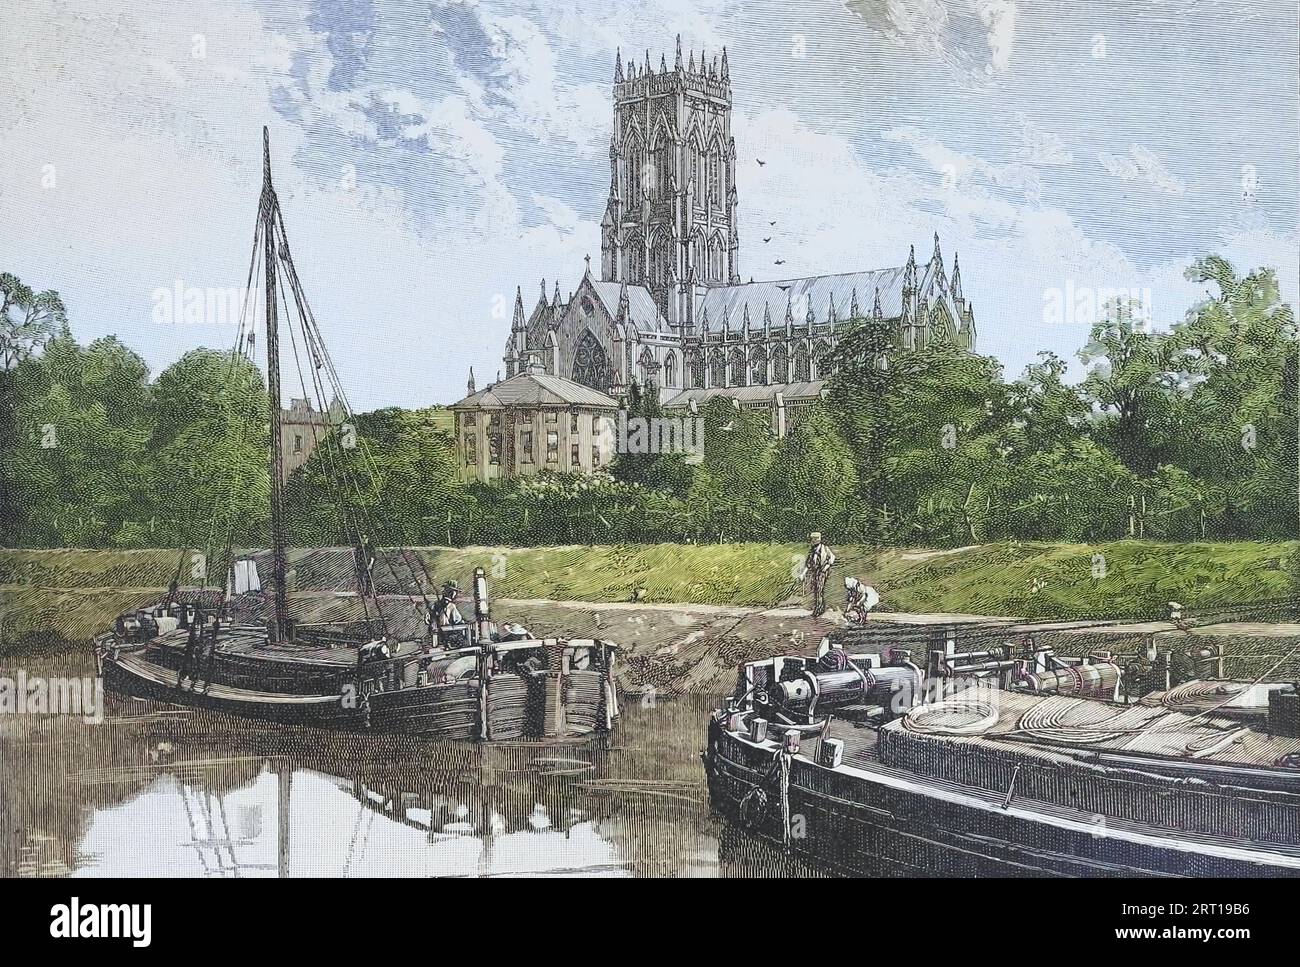 Doncaster ist eine Stadt in South Yorkshire, England. Benannt nach dem River Don, aus dem Buch Cathedrals, Abbeys and Churches of England and Wales : Descriptive, Historical, Pictorial von Bonney, T. G. (Thomas George), 1833-1923; Publisher London : Cassell 1890 Stockfoto